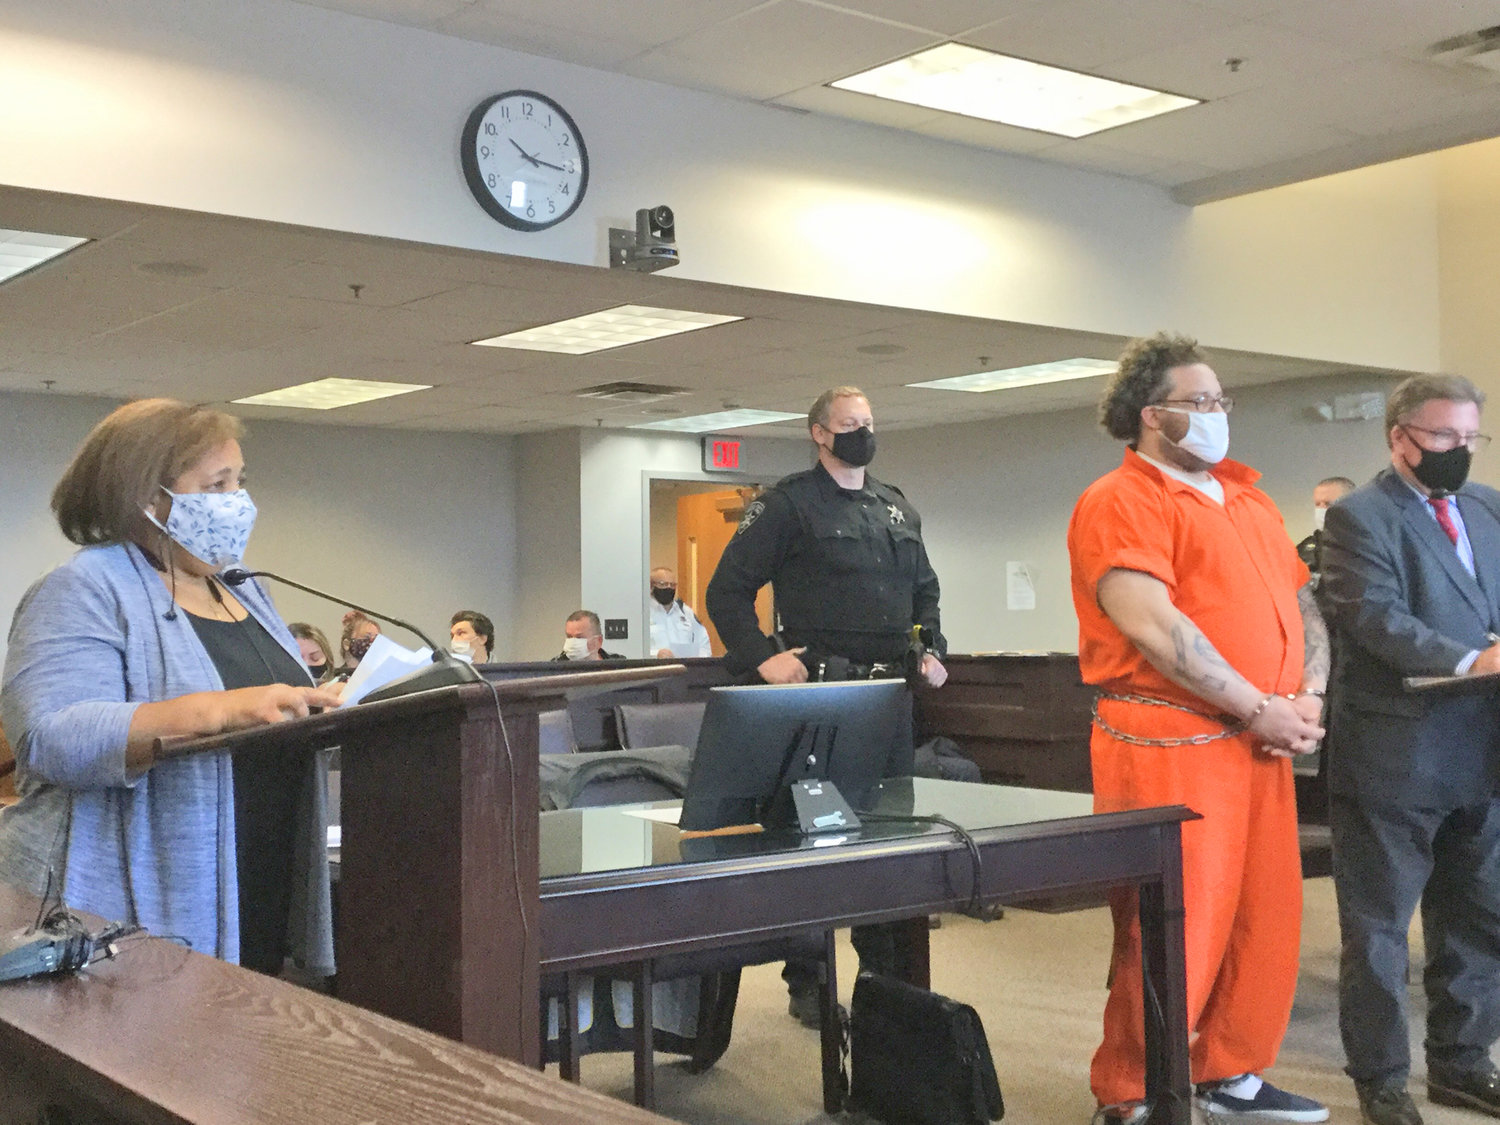 MOTHER CONFRONTS KILLER — Sadie Lesane could barely hold back her tears on Friday when she confronted her son’s killer in County Court. Lesane said Wilfredo Cotto “terrorizes” other people and it must be stopped.